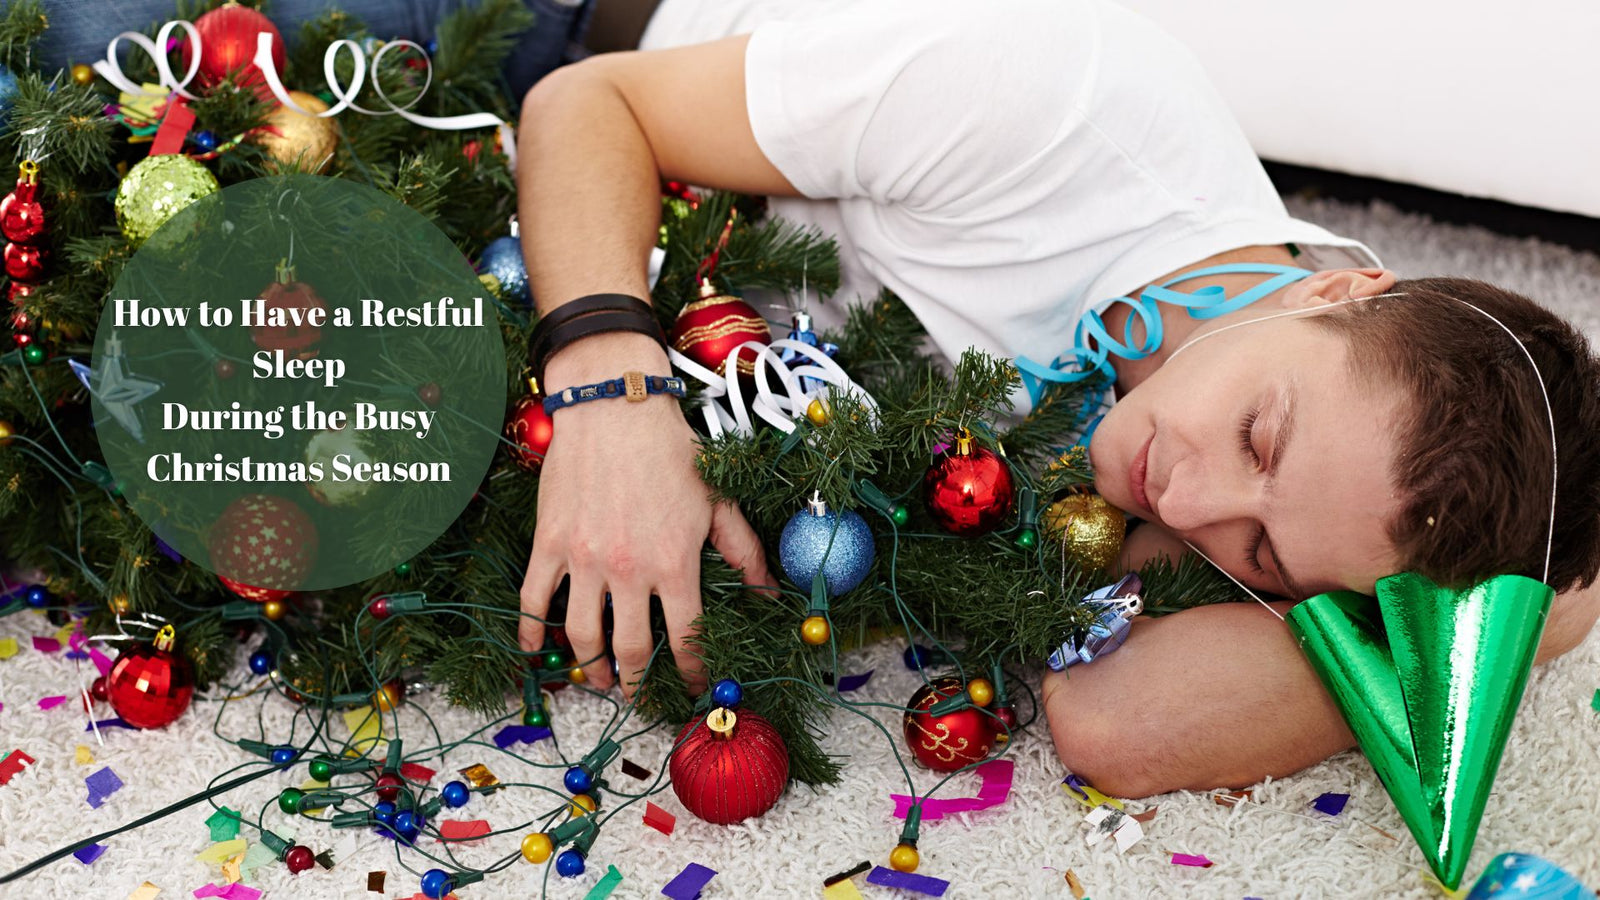 How to Have a Restful Sleep During the Busy Christmas Season